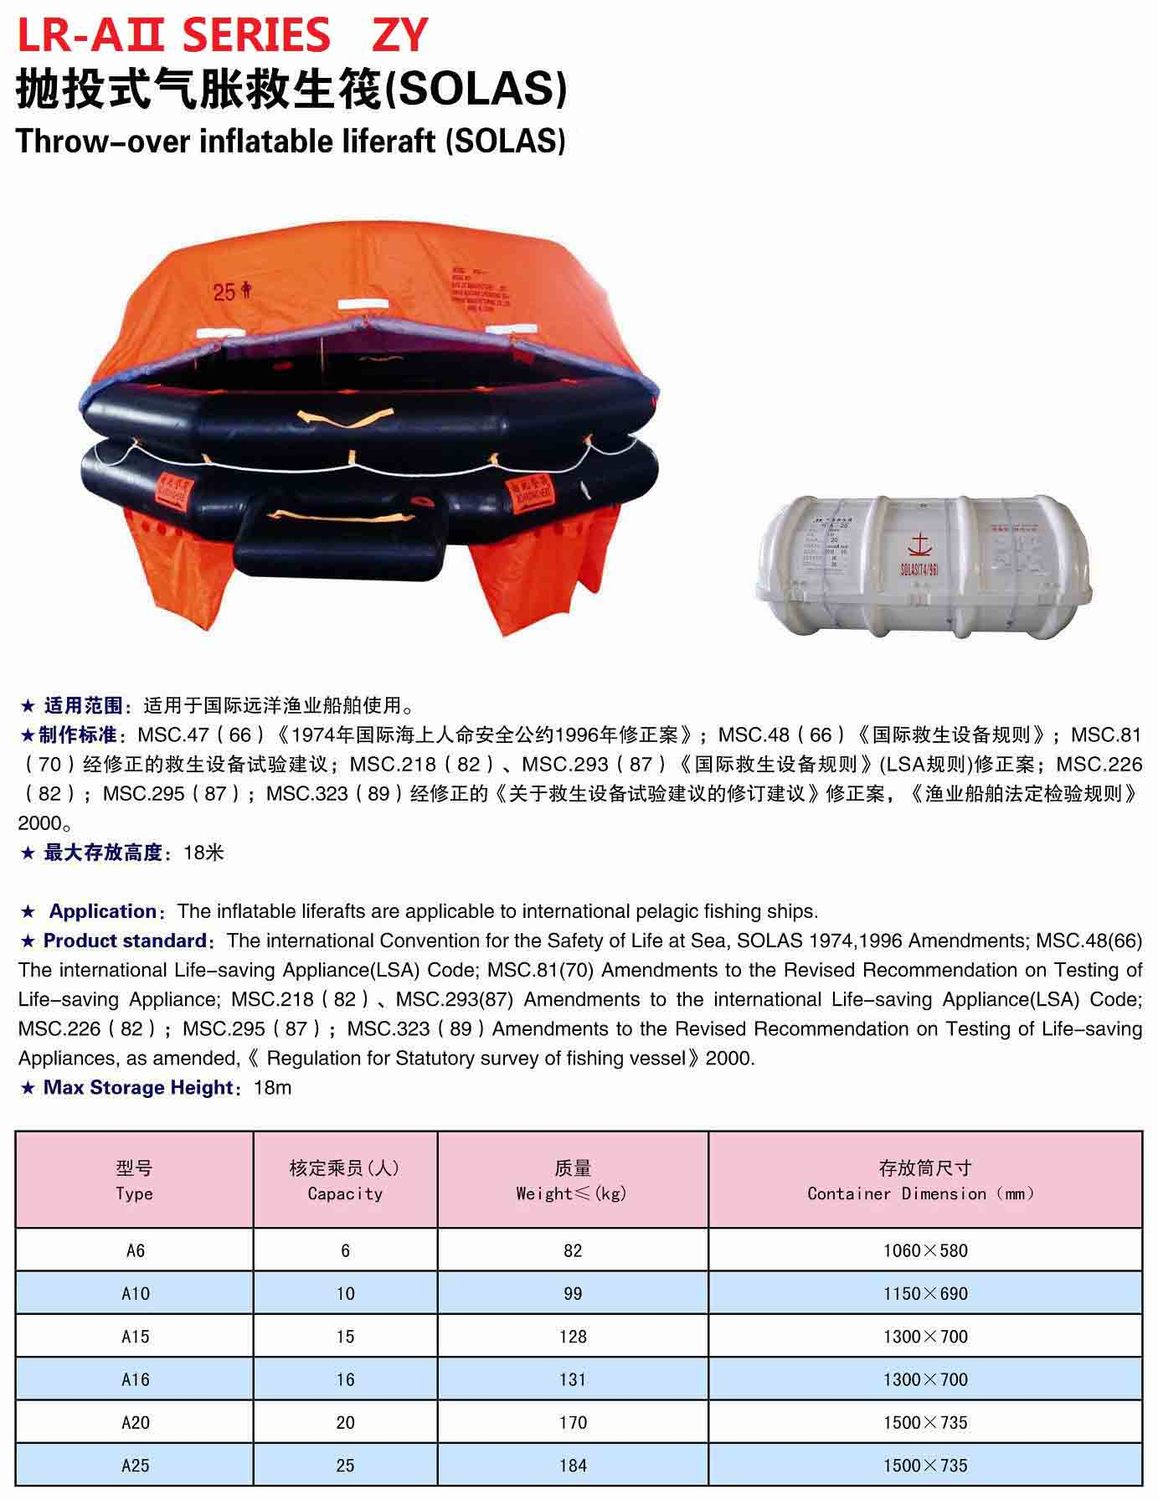 LR-AⅡ Series Throw-overboard Inflatable Liferaft(SOLAS)